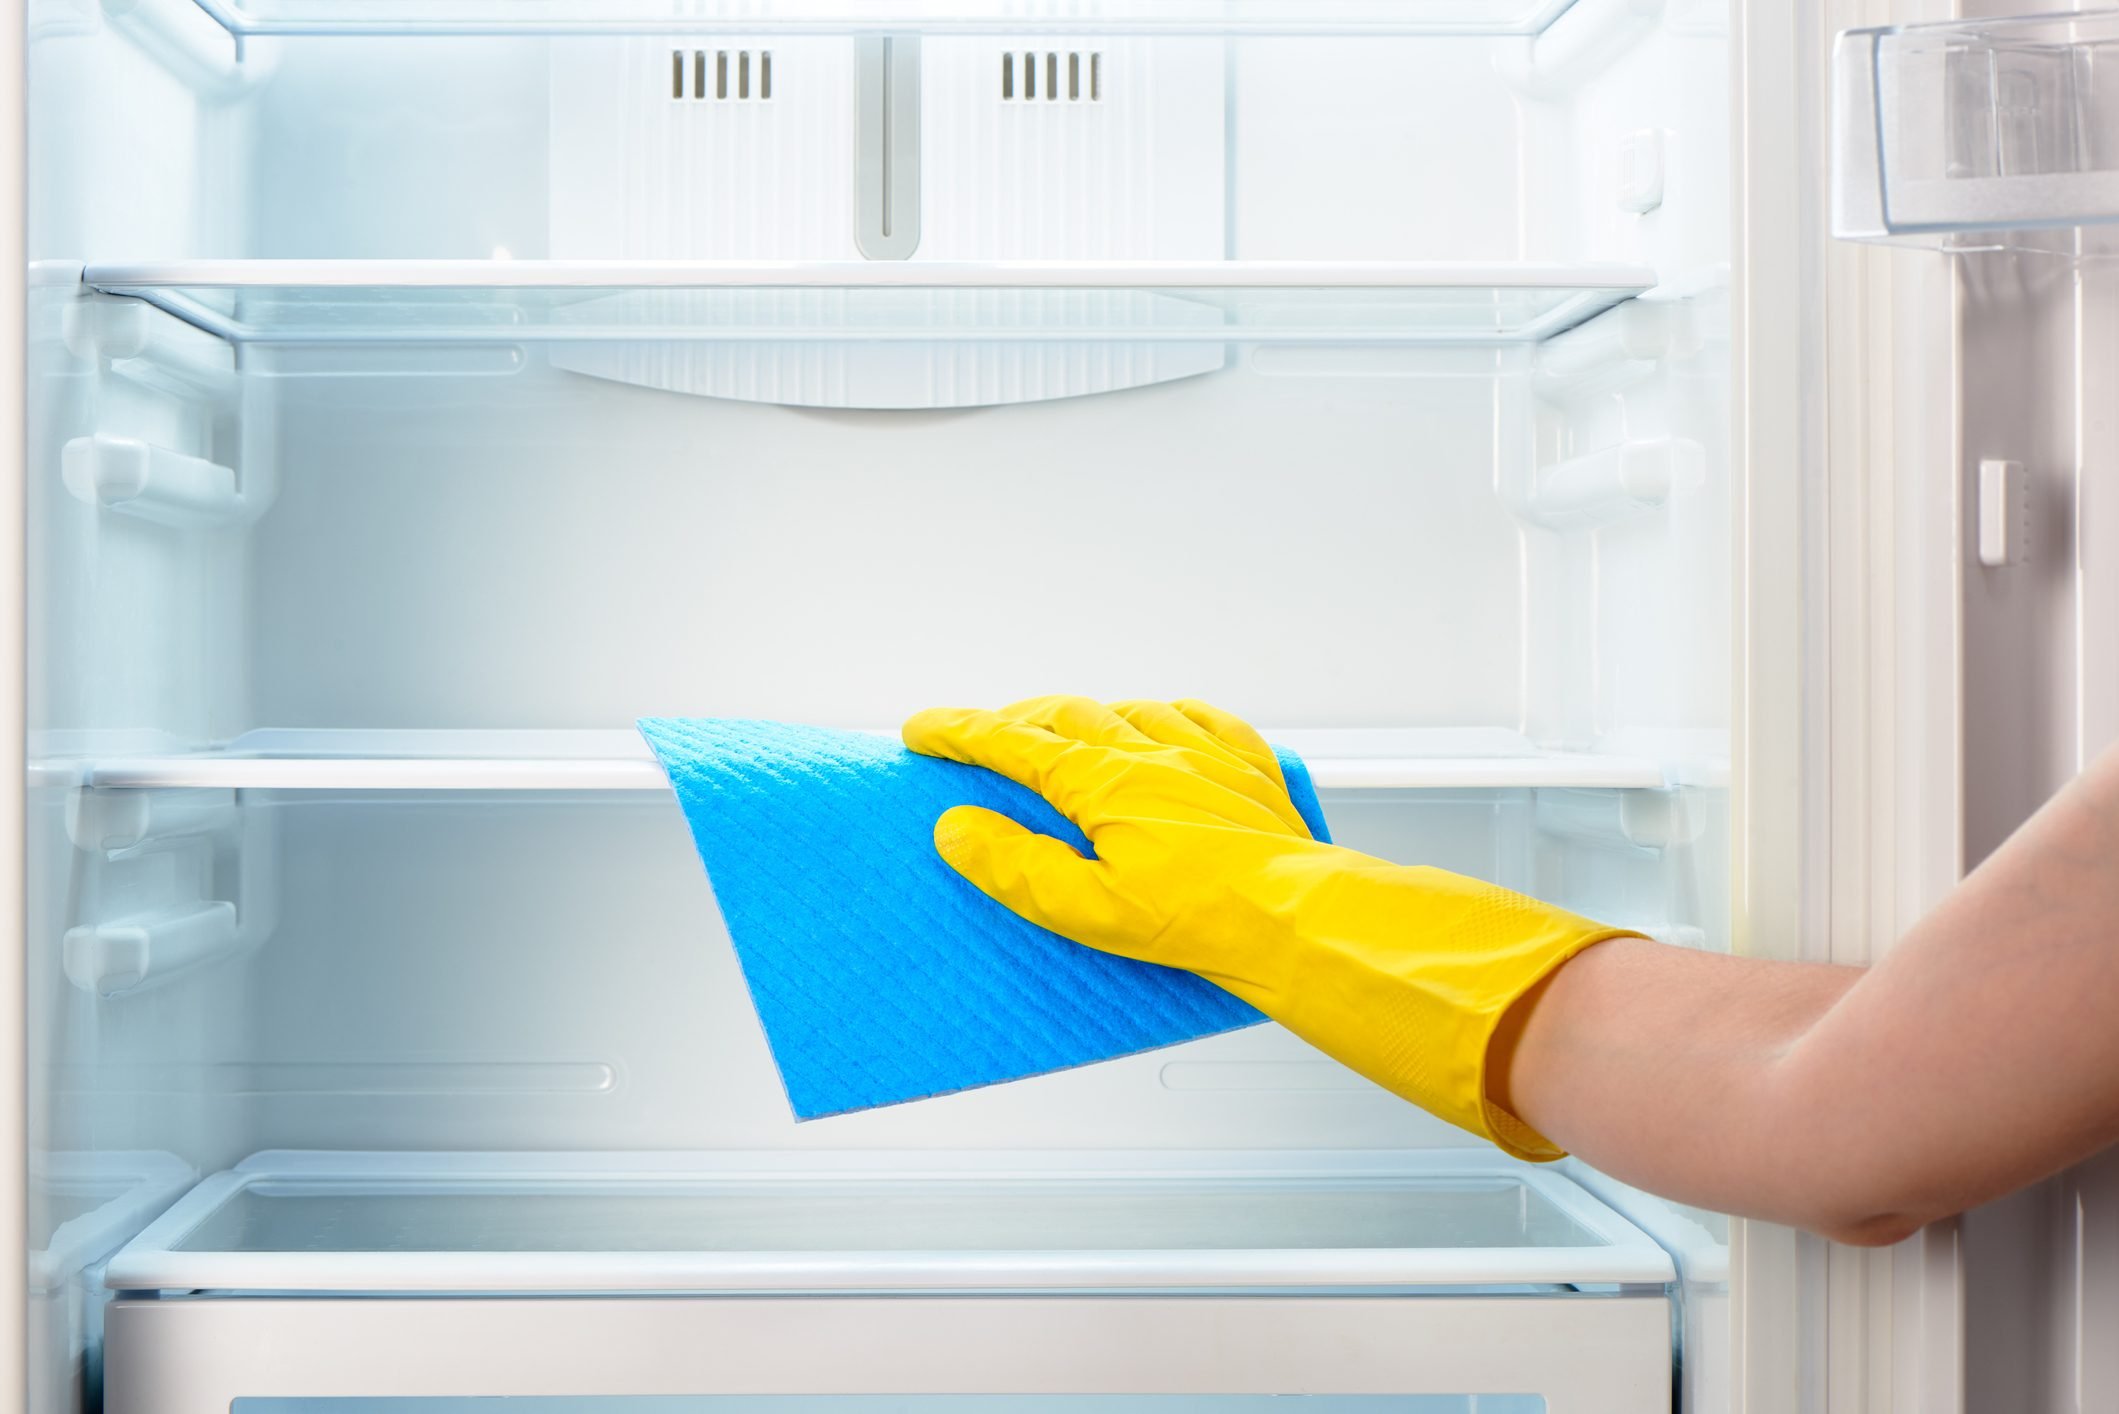 Tips for Thoroughly Cleaning a Refrigerator Both Inside and Out